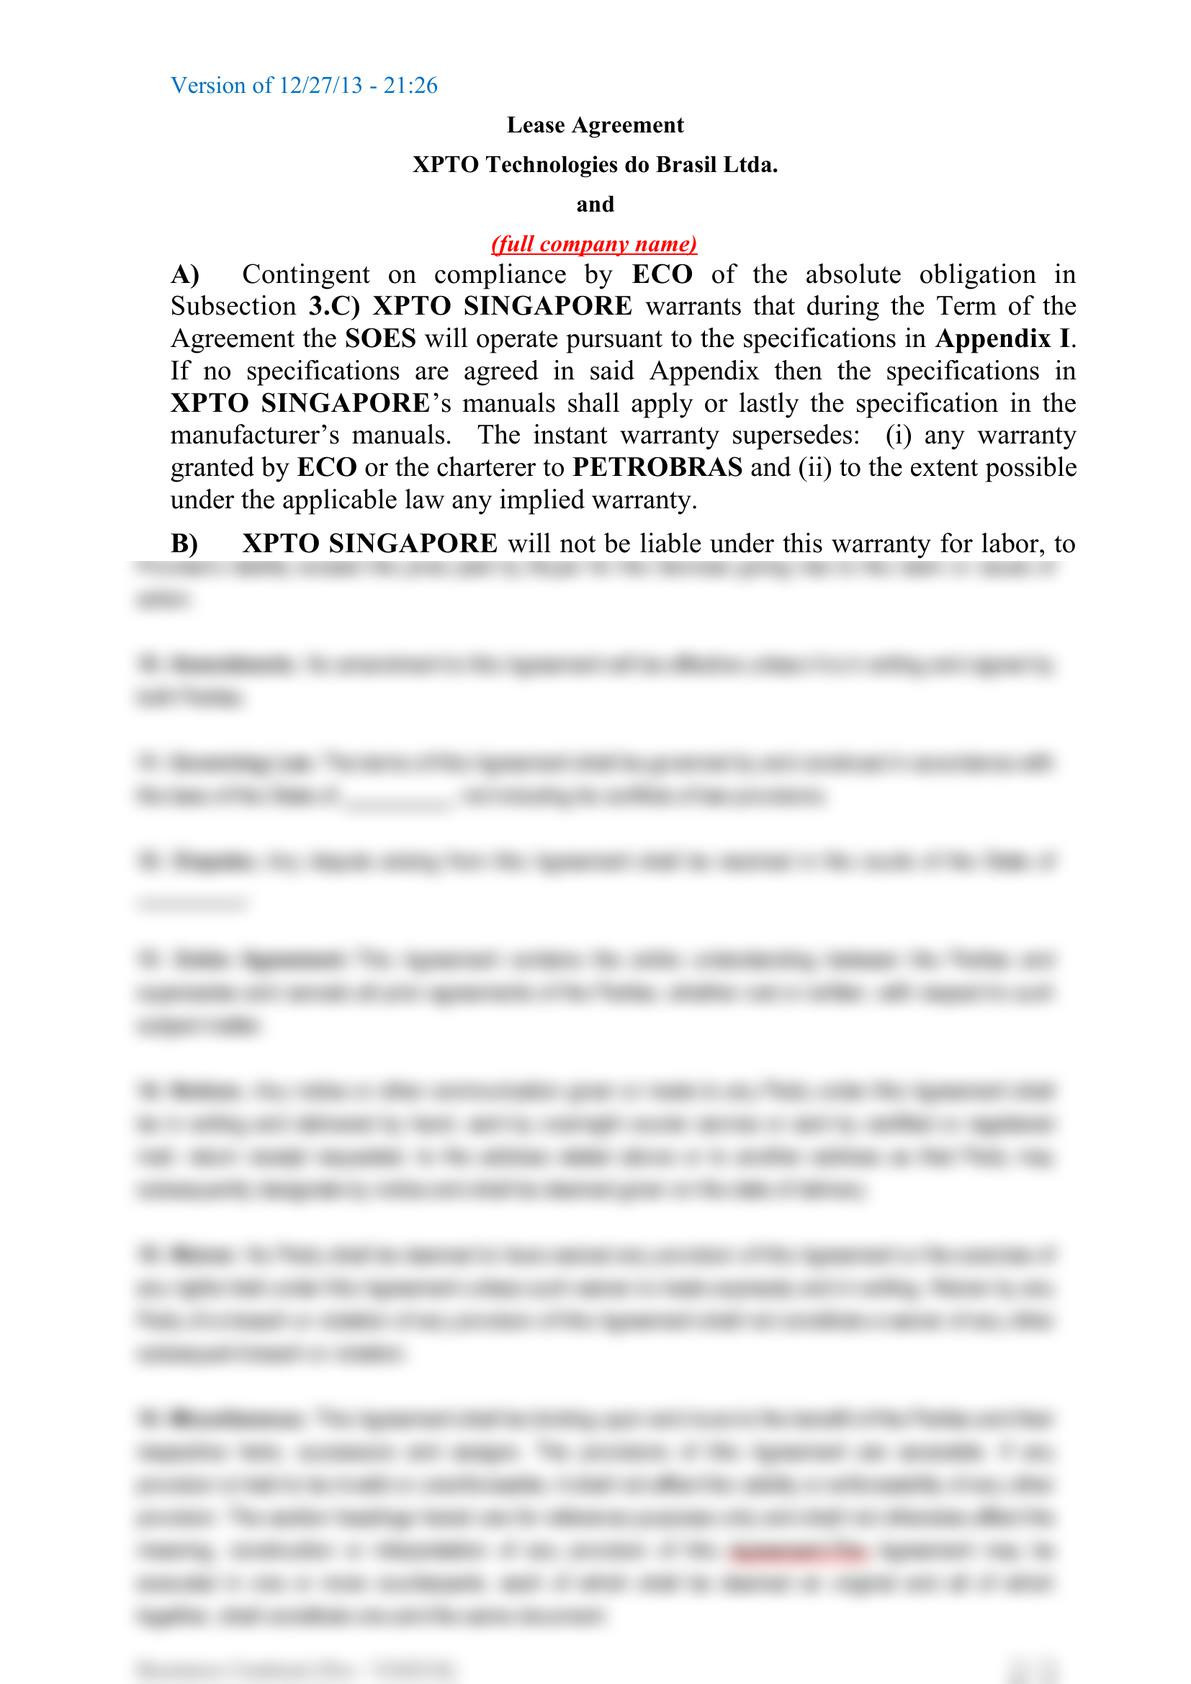 Subsea equipment lease agreement-5